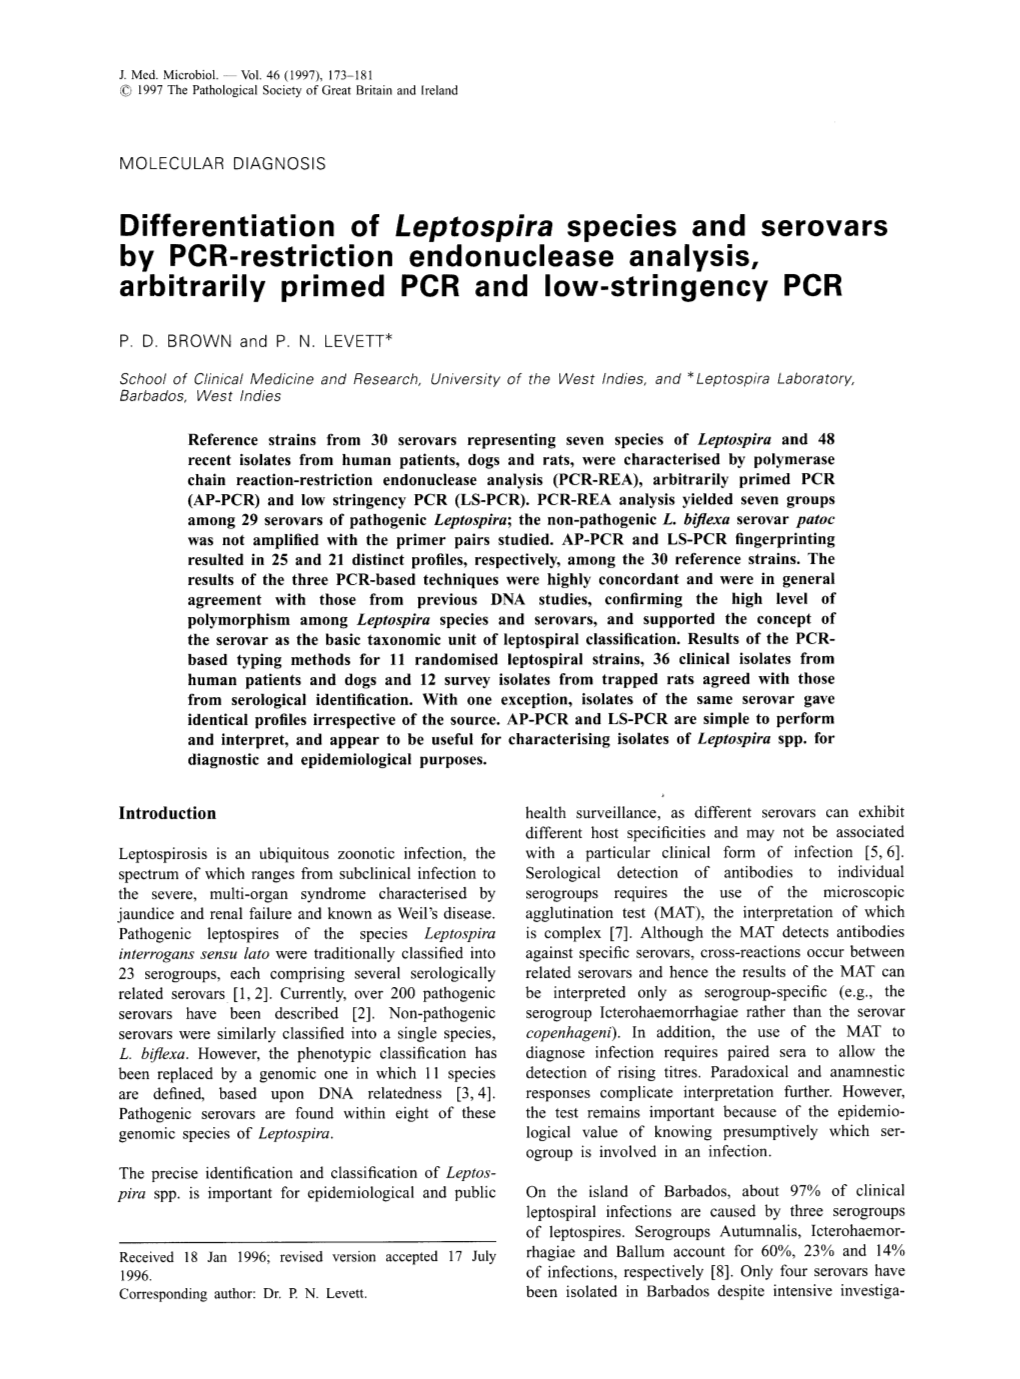 Differentiation of Leptospira Species and Serovars by PCR-Restriction Endonuclease Analysis, Arbitrarily Primed PCR and Low-Stringency PCR